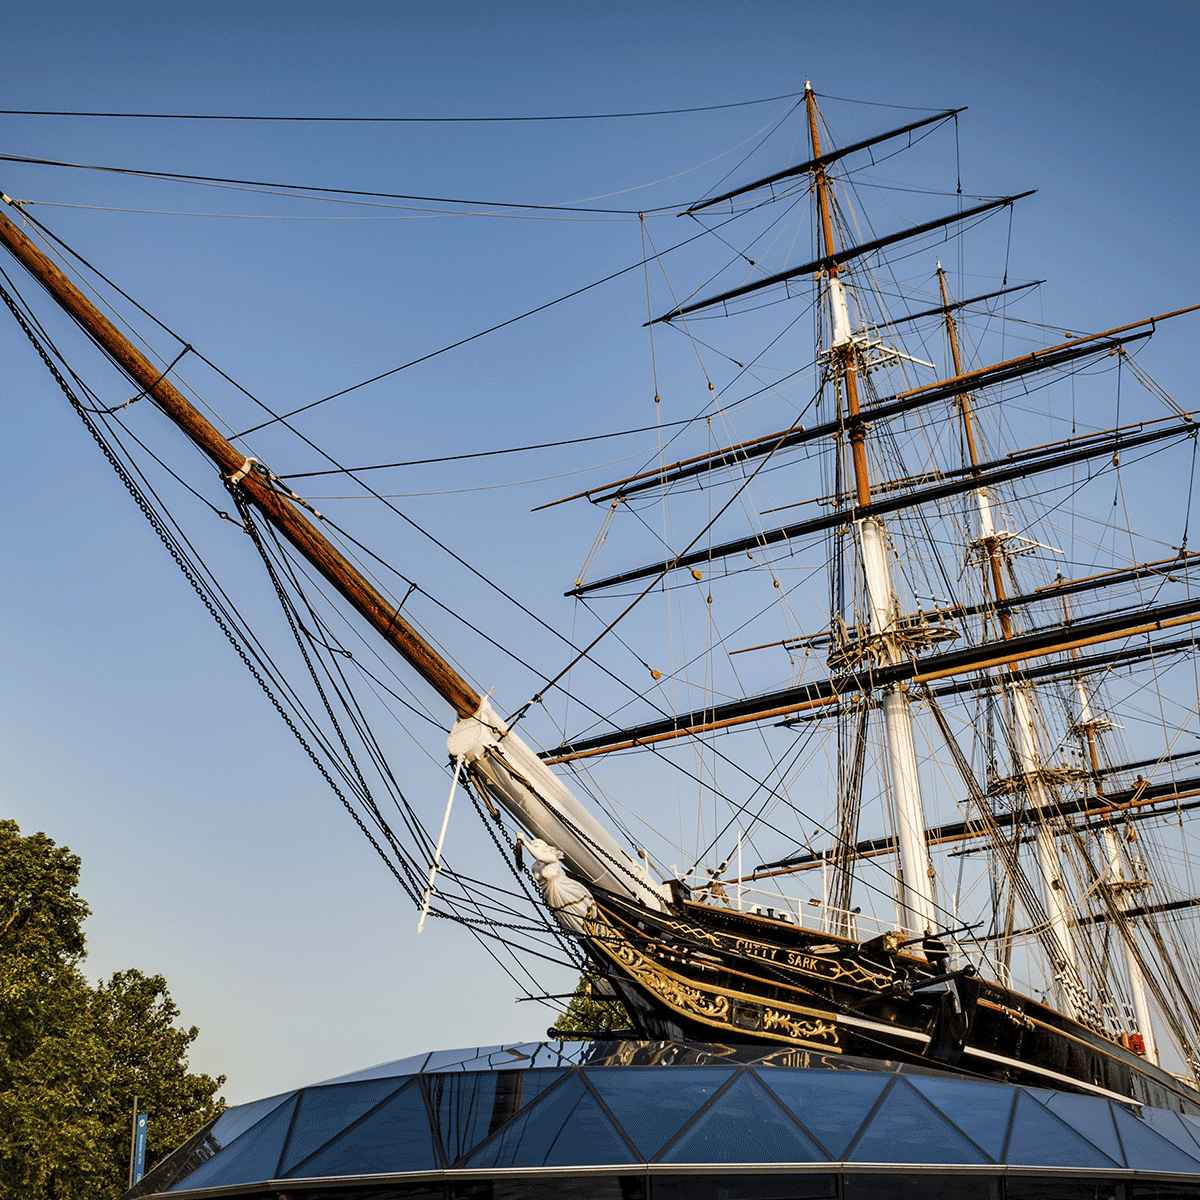 http://www.thetoolroom.co.uk/wp-content/uploads/2015/09/NTR-projects-cutty-sark-1.png